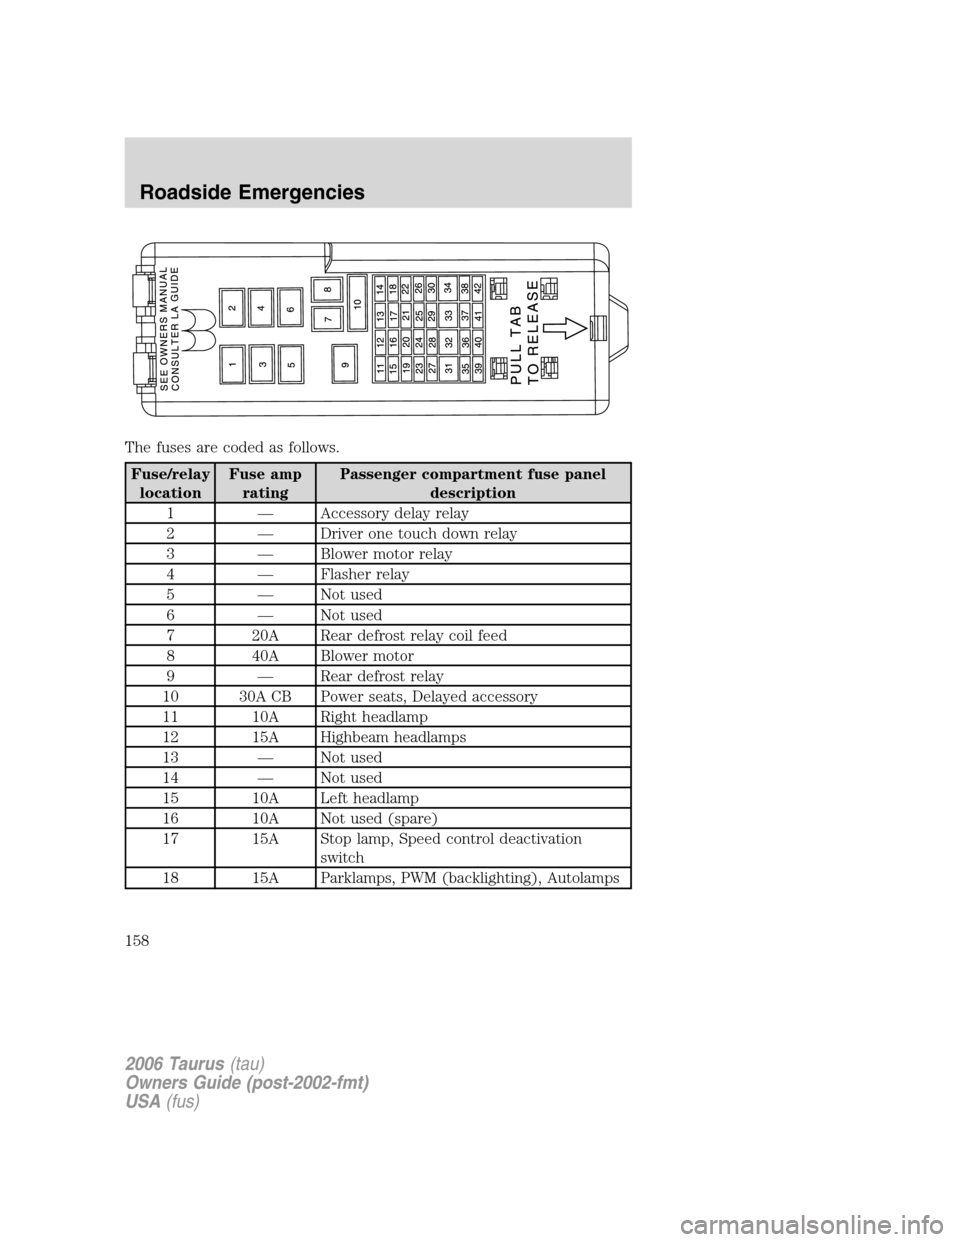 FORD TAURUS 2006 4.G Owners Manual The fuses are coded as follows.
Fuse/relay
locationFuse amp
ratingPassenger compartment fuse panel
description
1 — Accessory delay relay
2 — Driver one touch down relay
3 — Blower motor relay
4 